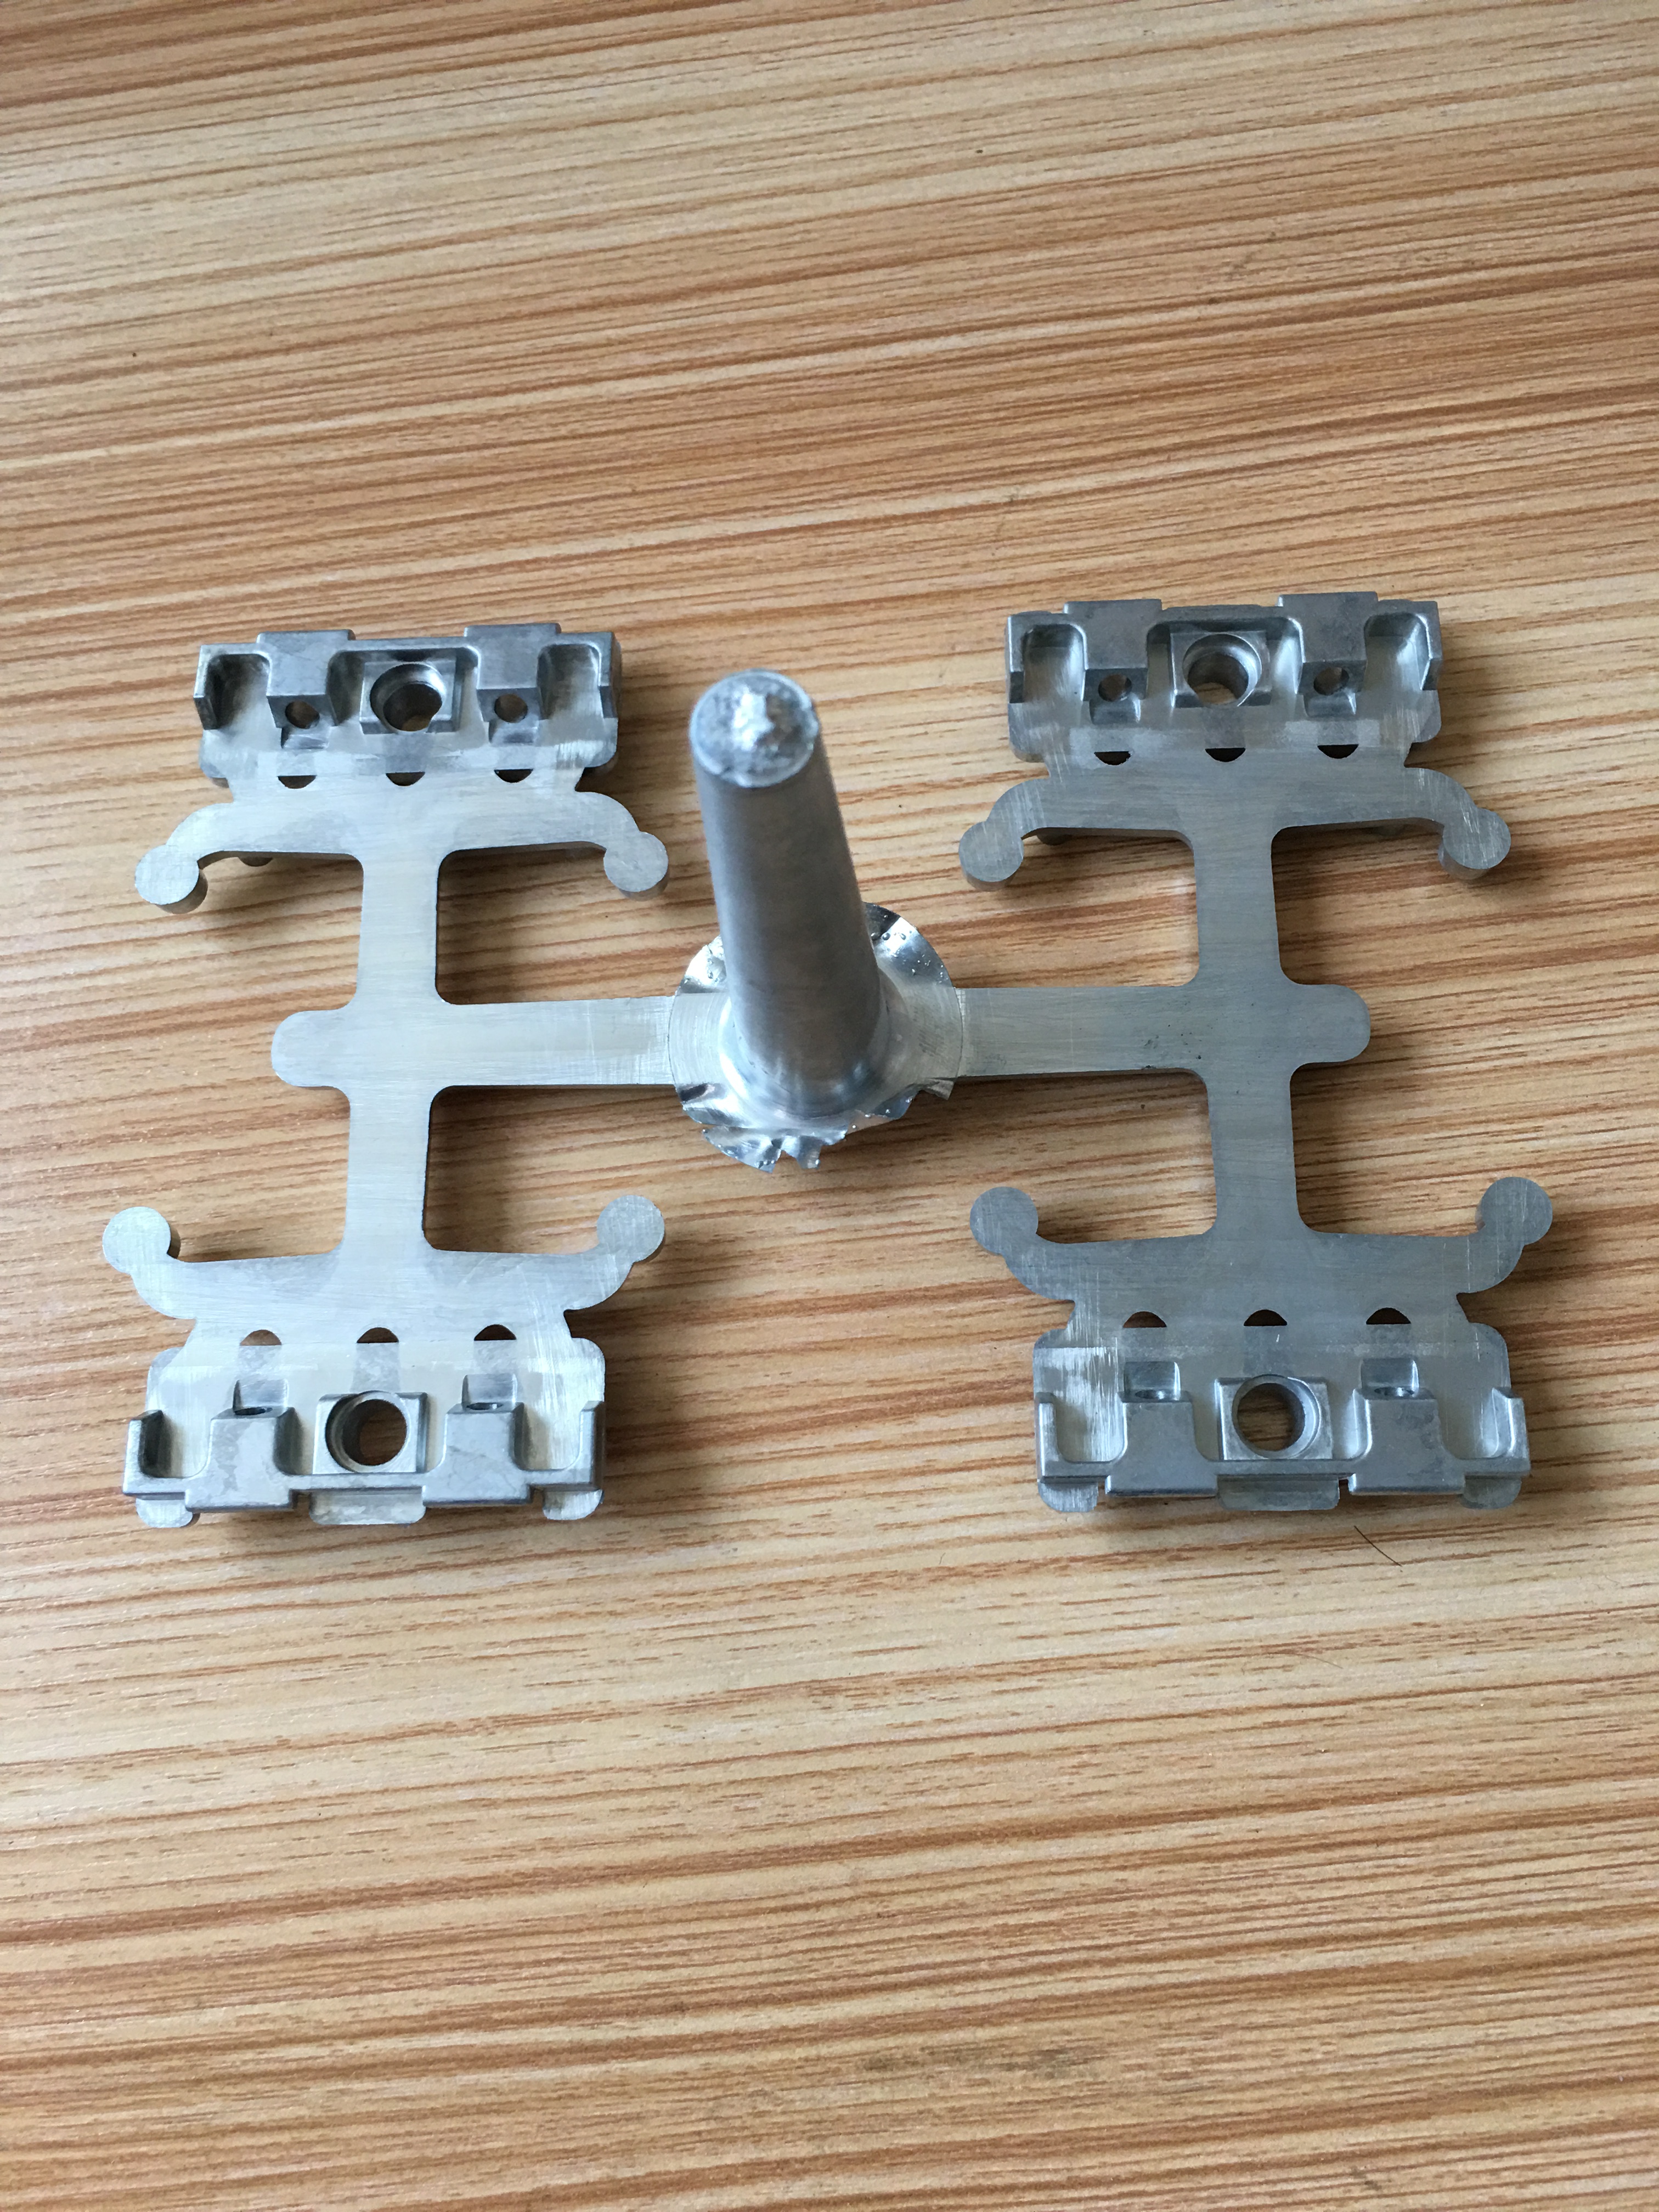 As a solidworks injection mold design manufacturers,what should we do if we receive low-quality parts?